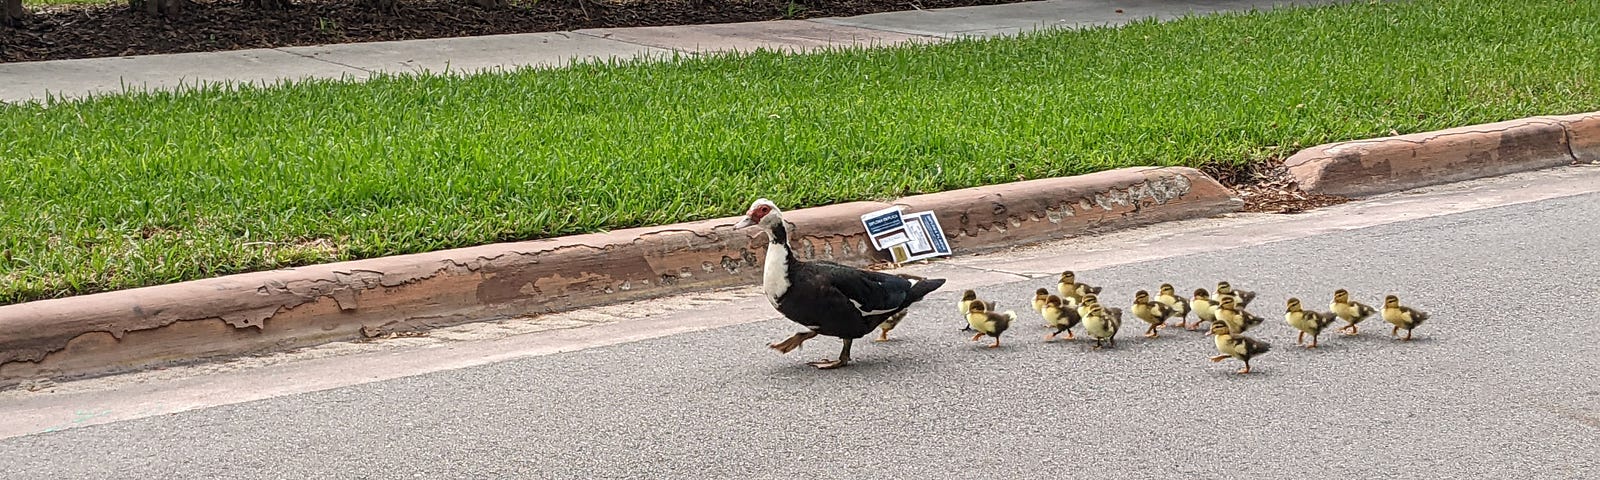 A Muscovy duck mother is leading about 17 ducklings walking on the street. Green grass and a sidewalk are next to them.